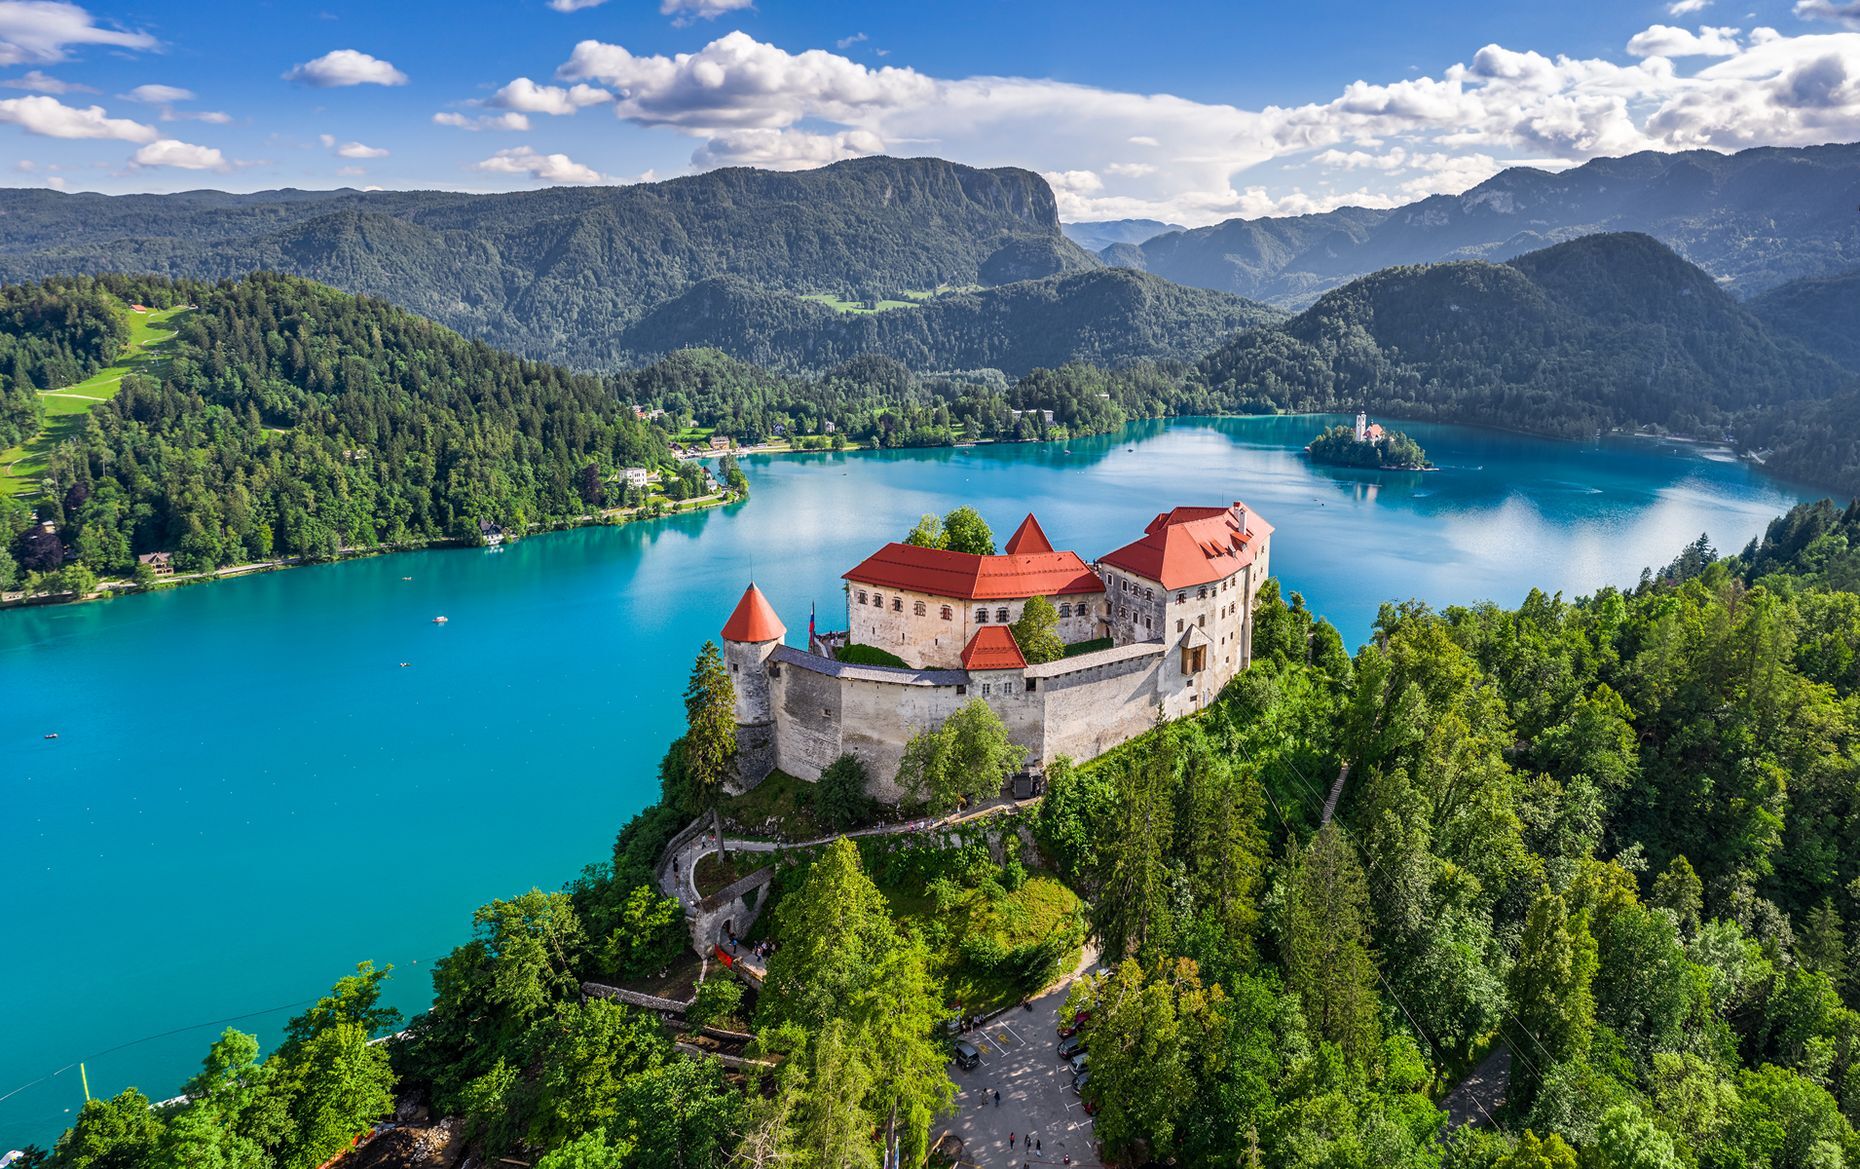 <p>Nestled in the heart of the Julian Alps, <a href="https://www.bled.si/en/">Bled</a> looks like something straight out of a fairytale. Book a traditional Slovenian boat, <a href="https://www.bled.si/en/what-to-see-do/attractions/38/pletna-boat/">called a <em>pletna</em></a>, to explore Bled Island and the area’s famous lake while admiring the surrounding mountains. You can also hike the alpine trails to the top of the cliff and visit Bled’s medieval castle, which offers an unrivalled view of the town. While you’re there, you have to try a piece of <em>kremna rezina</em>, a delicious local pastry brimming with cream and custard.</p>